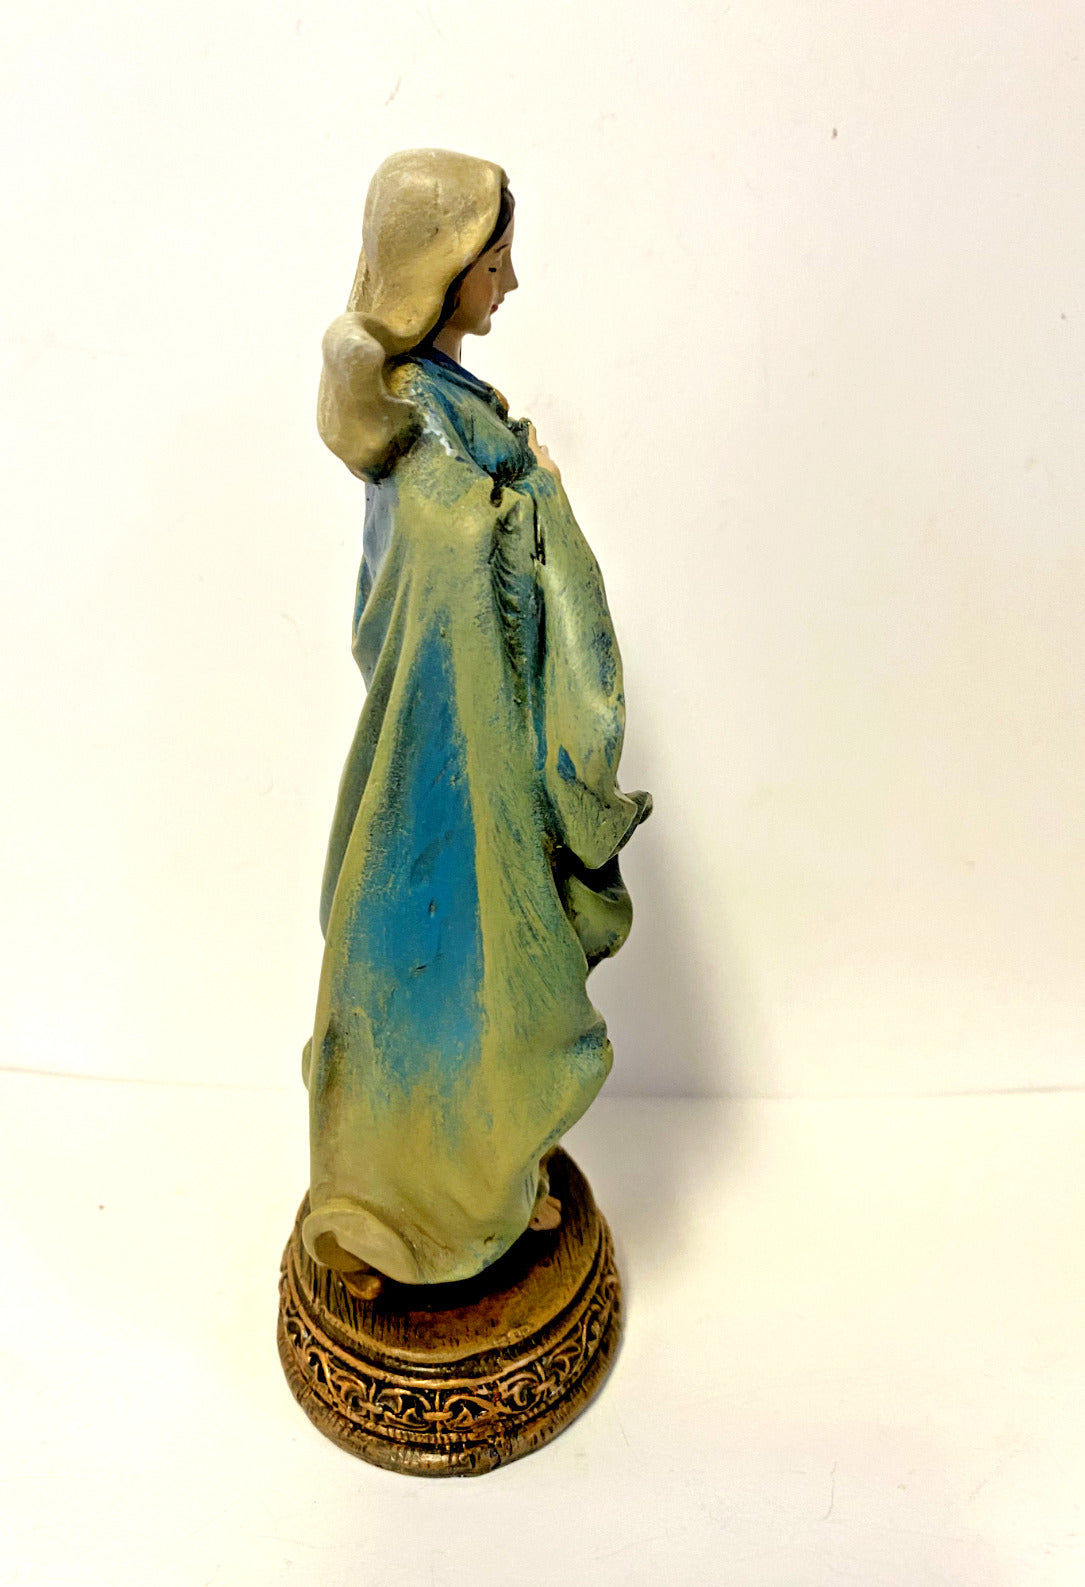 Immaculate Heart of Mary 6" Statue, New - Bob and Penny Lord